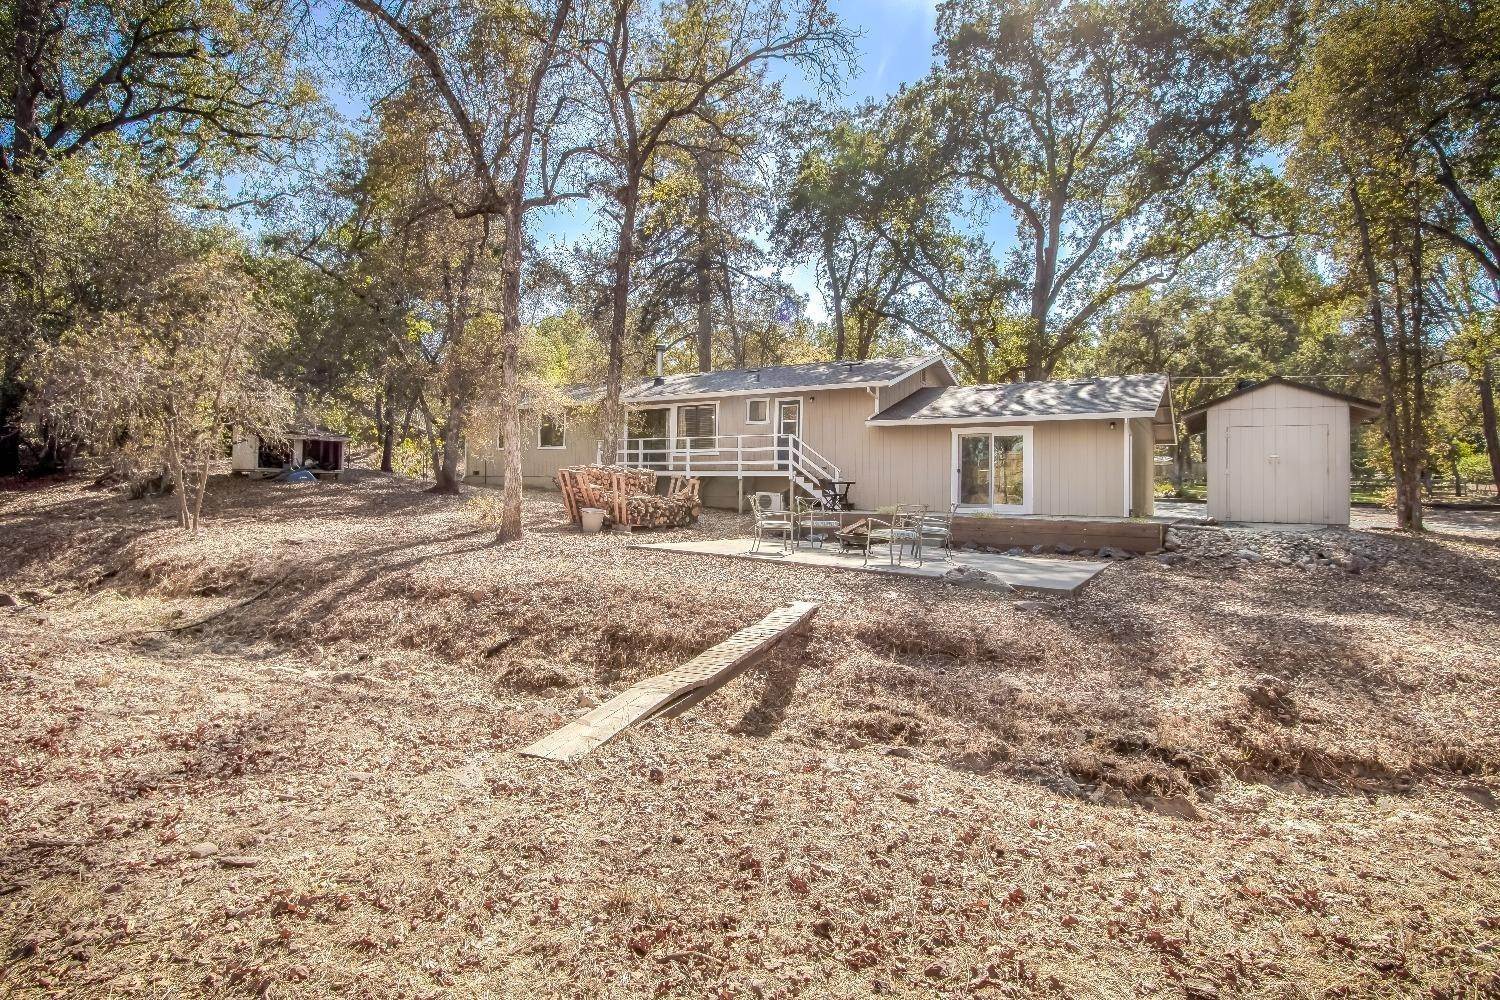 41. Single Family Homes for Active at 4115 Fairhaven Lane Placerville, California 95667 United States